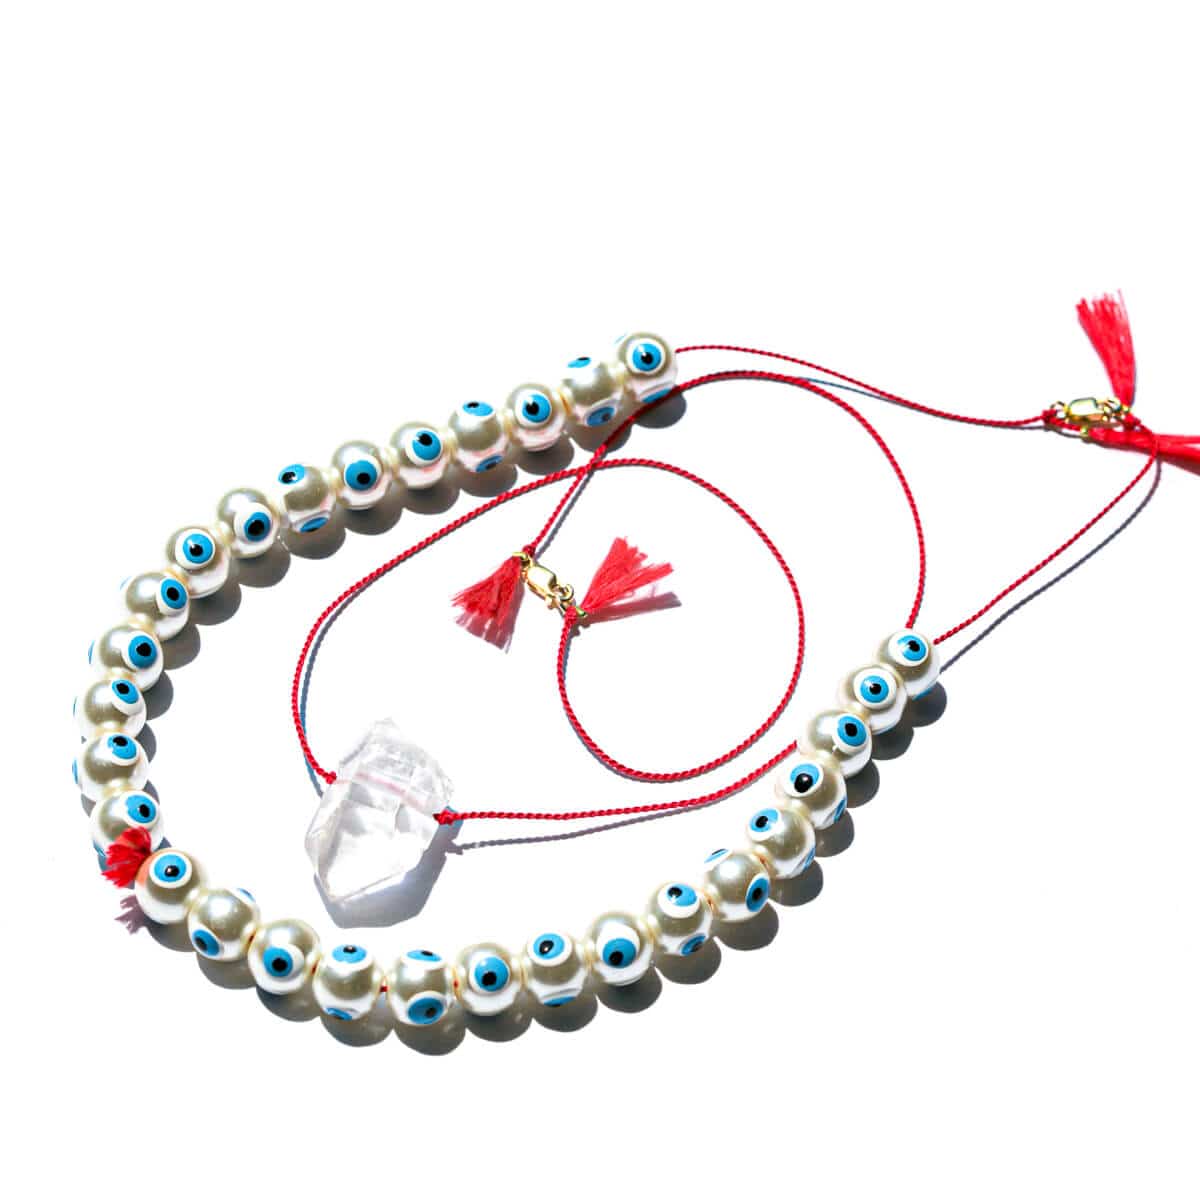 Sunday Forever CRYSTALS Clear Quartz Red String Necklace